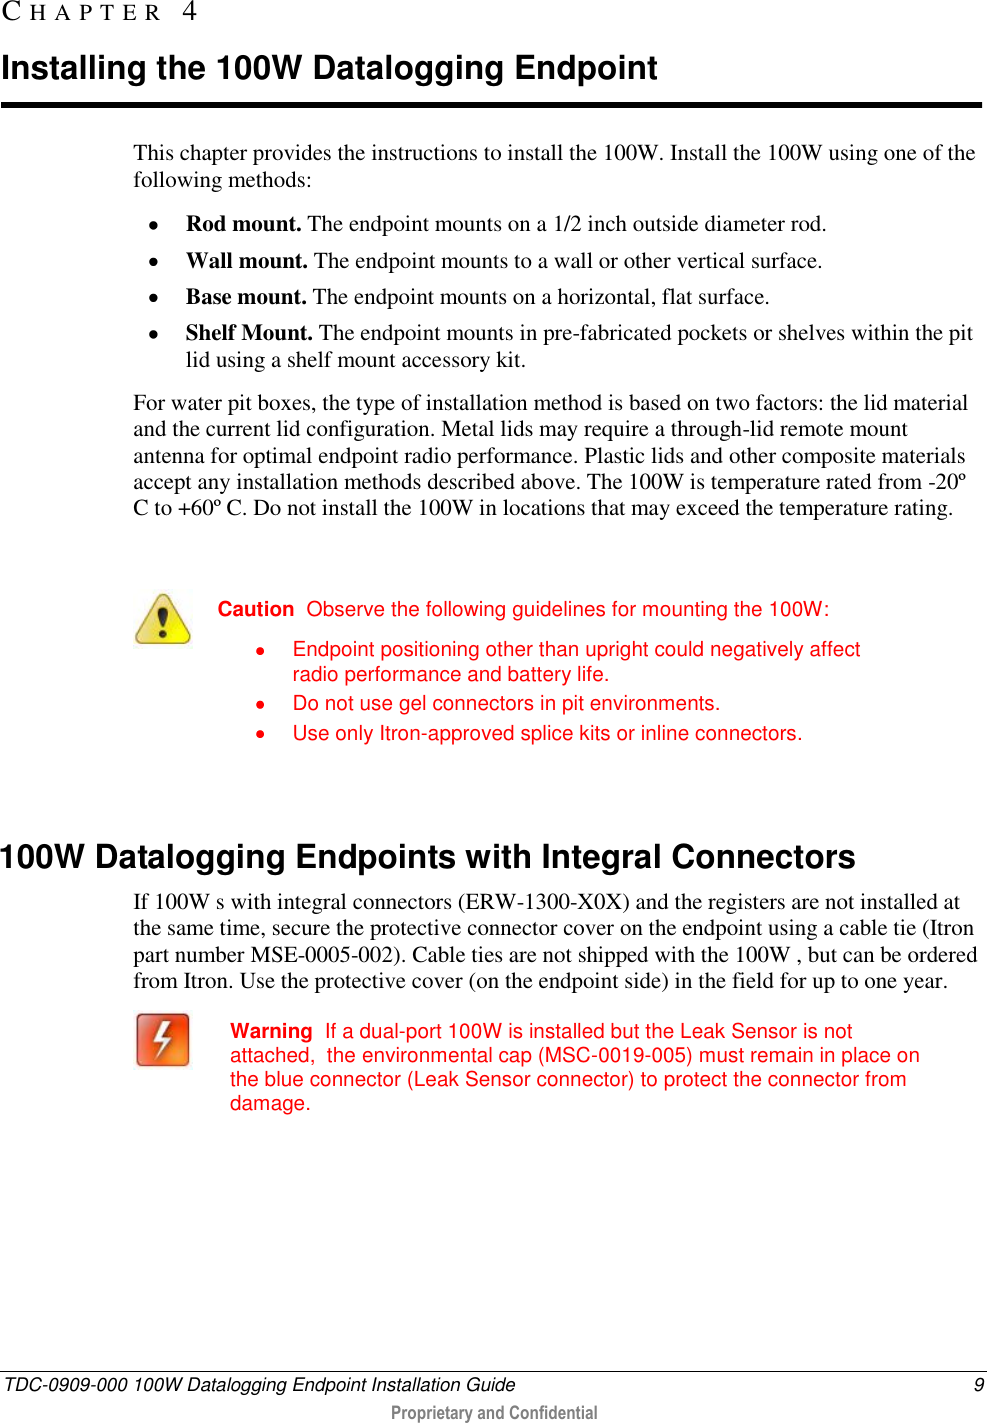  TDC-0909-000 100W Datalogging Endpoint Installation Guide  9  Proprietary and Confidential  This chapter provides the instructions to install the 100W. Install the 100W using one of the following methods:  Rod mount. The endpoint mounts on a 1/2 inch outside diameter rod.  Wall mount. The endpoint mounts to a wall or other vertical surface.  Base mount. The endpoint mounts on a horizontal, flat surface.  Shelf Mount. The endpoint mounts in pre-fabricated pockets or shelves within the pit lid using a shelf mount accessory kit. For water pit boxes, the type of installation method is based on two factors: the lid material and the current lid configuration. Metal lids may require a through-lid remote mount antenna for optimal endpoint radio performance. Plastic lids and other composite materials accept any installation methods described above. The 100W is temperature rated from -20º C to +60º C. Do not install the 100W in locations that may exceed the temperature rating.   Caution  Observe the following guidelines for mounting the 100W:   Endpoint positioning other than upright could negatively affect radio performance and battery life.   Do not use gel connectors in pit environments.   Use only Itron-approved splice kits or inline connectors.    100W Datalogging Endpoints with Integral Connectors If 100W s with integral connectors (ERW-1300-X0X) and the registers are not installed at the same time, secure the protective connector cover on the endpoint using a cable tie (Itron part number MSE-0005-002). Cable ties are not shipped with the 100W , but can be ordered from Itron. Use the protective cover (on the endpoint side) in the field for up to one year.  Warning  If a dual-port 100W is installed but the Leak Sensor is not attached,  the environmental cap (MSC-0019-005) must remain in place on the blue connector (Leak Sensor connector) to protect the connector from damage.    CH A P T E R   4  Installing the 100W Datalogging Endpoint 